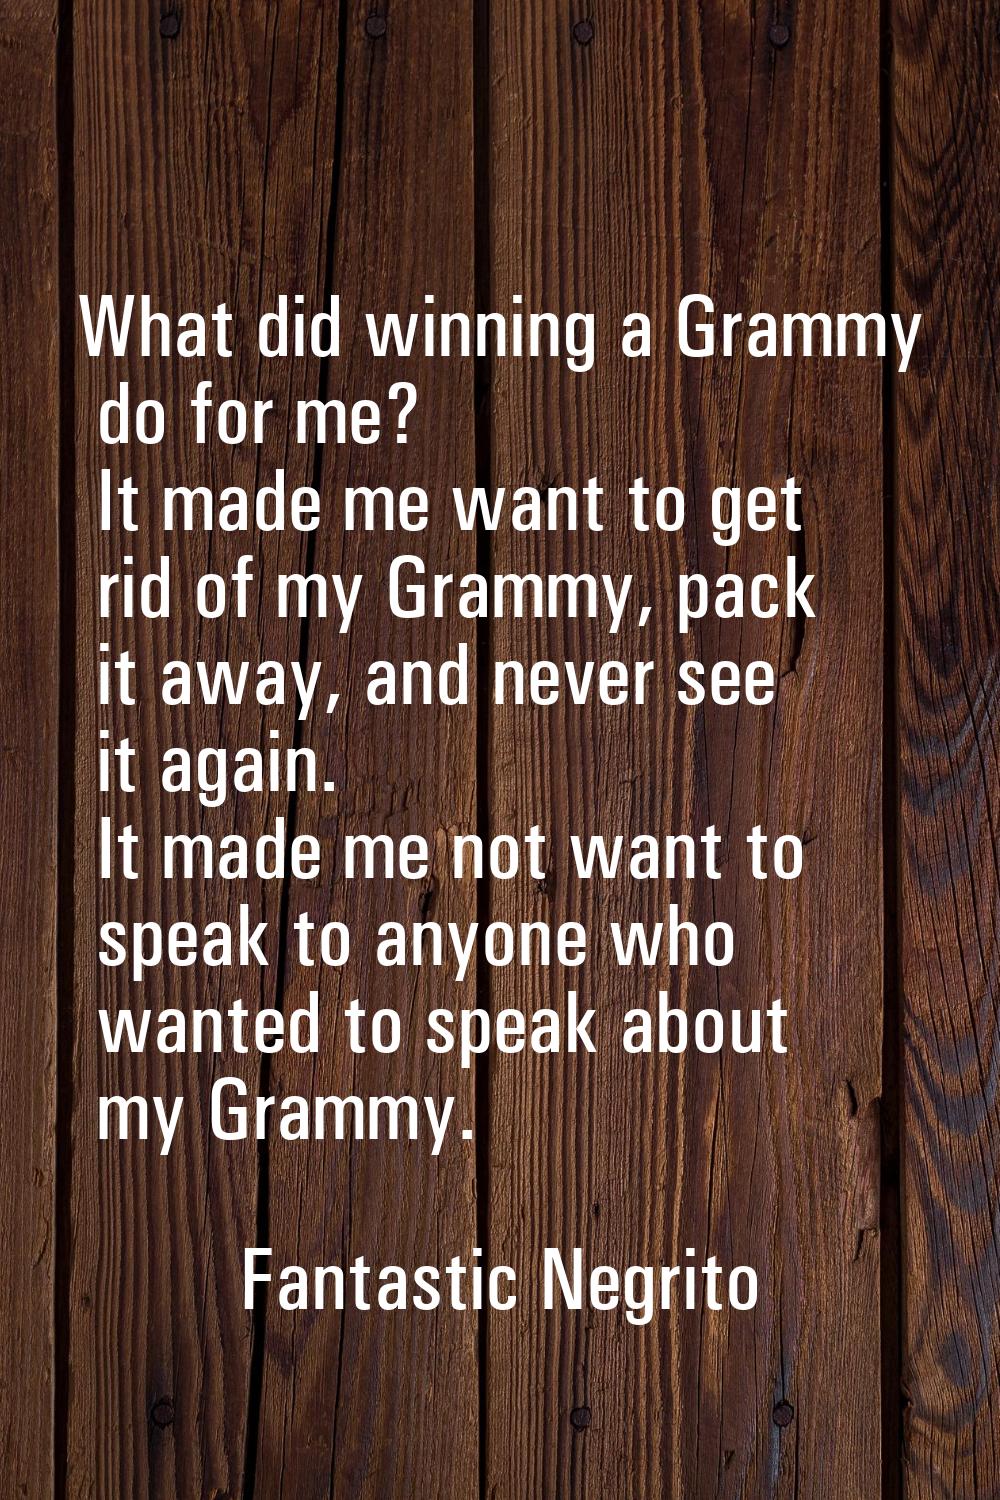 What did winning a Grammy do for me? It made me want to get rid of my Grammy, pack it away, and nev